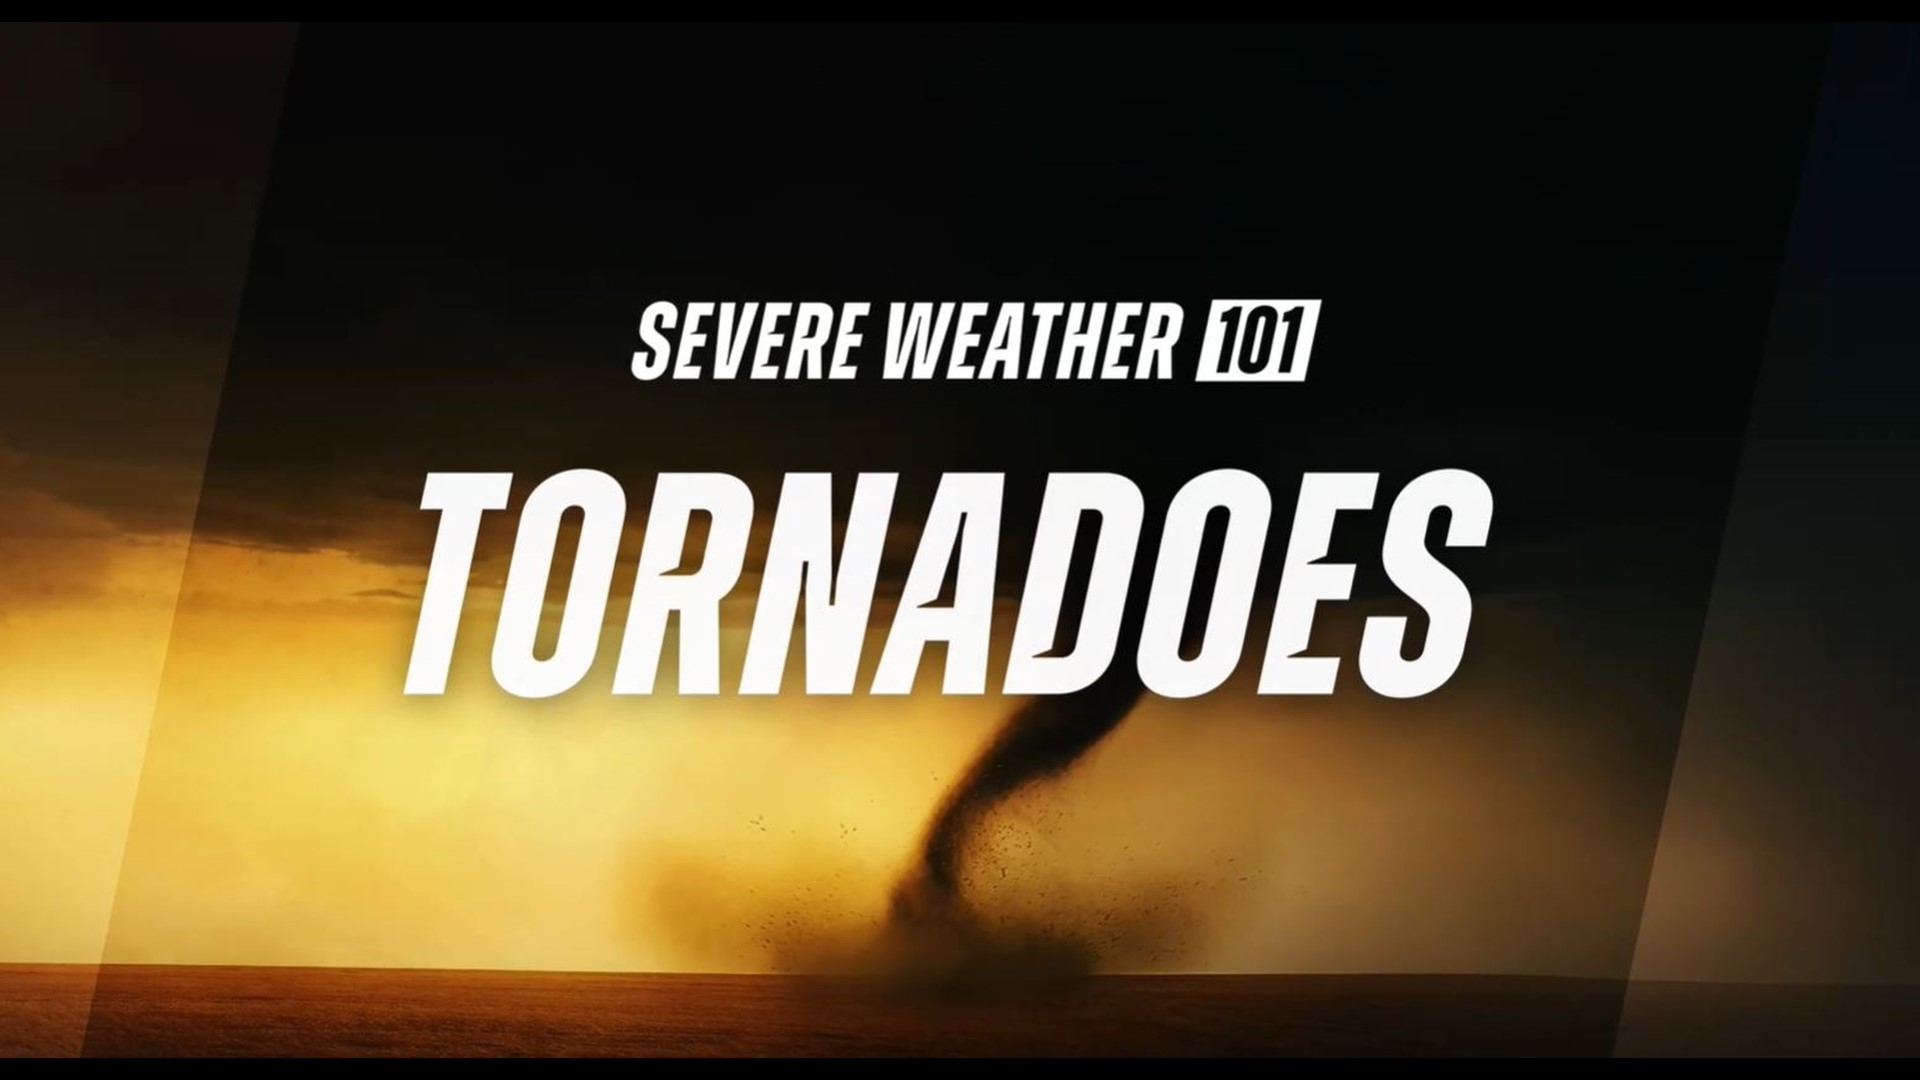 Tips on preparing for tornado and what to do if there is a tornado warning and severe storms in your area.